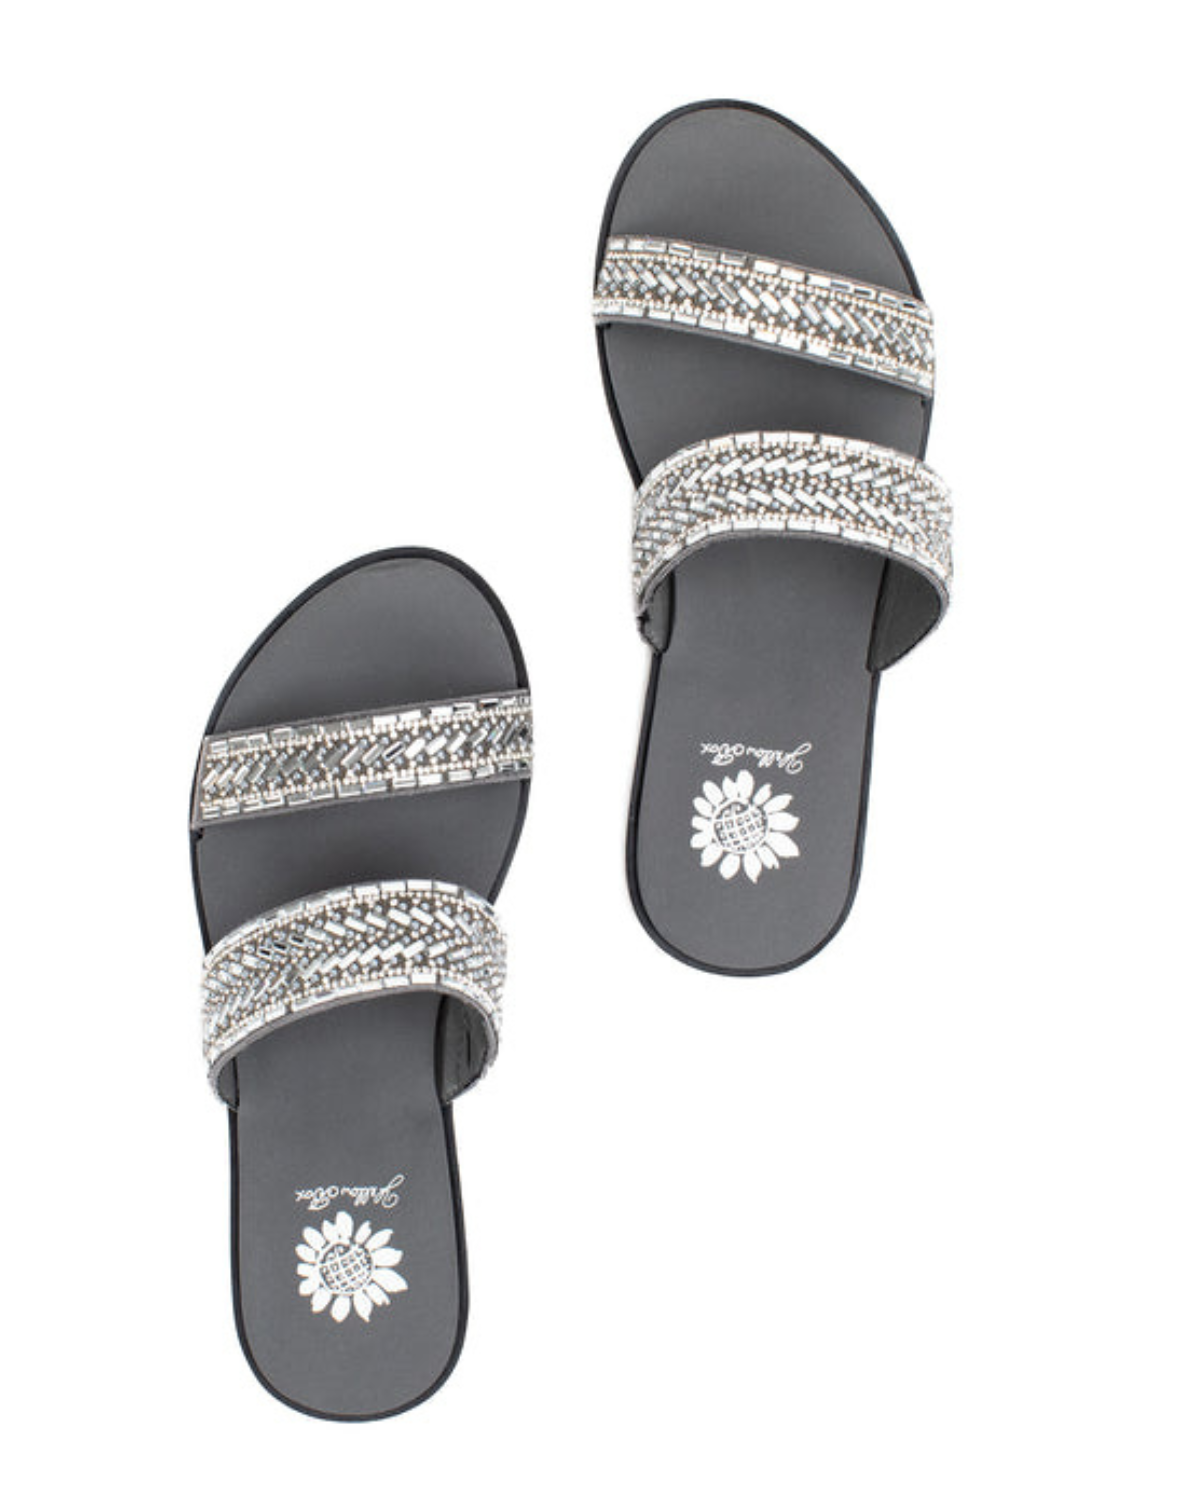 A pair of women's grey sandal with two straps of rhinostones.